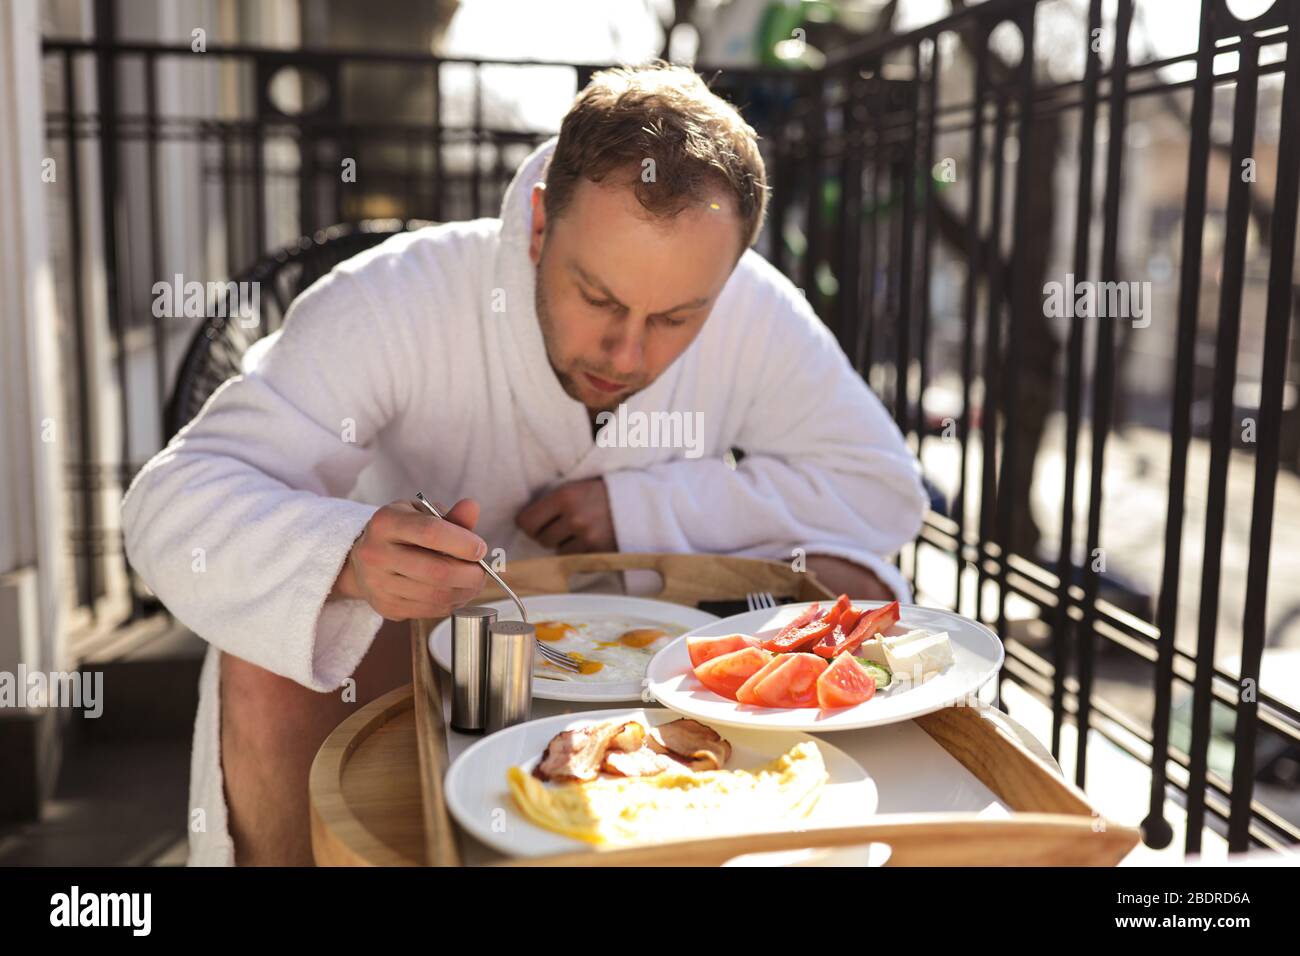 Good looking hungry man having his meal Stock Photo - Alamy